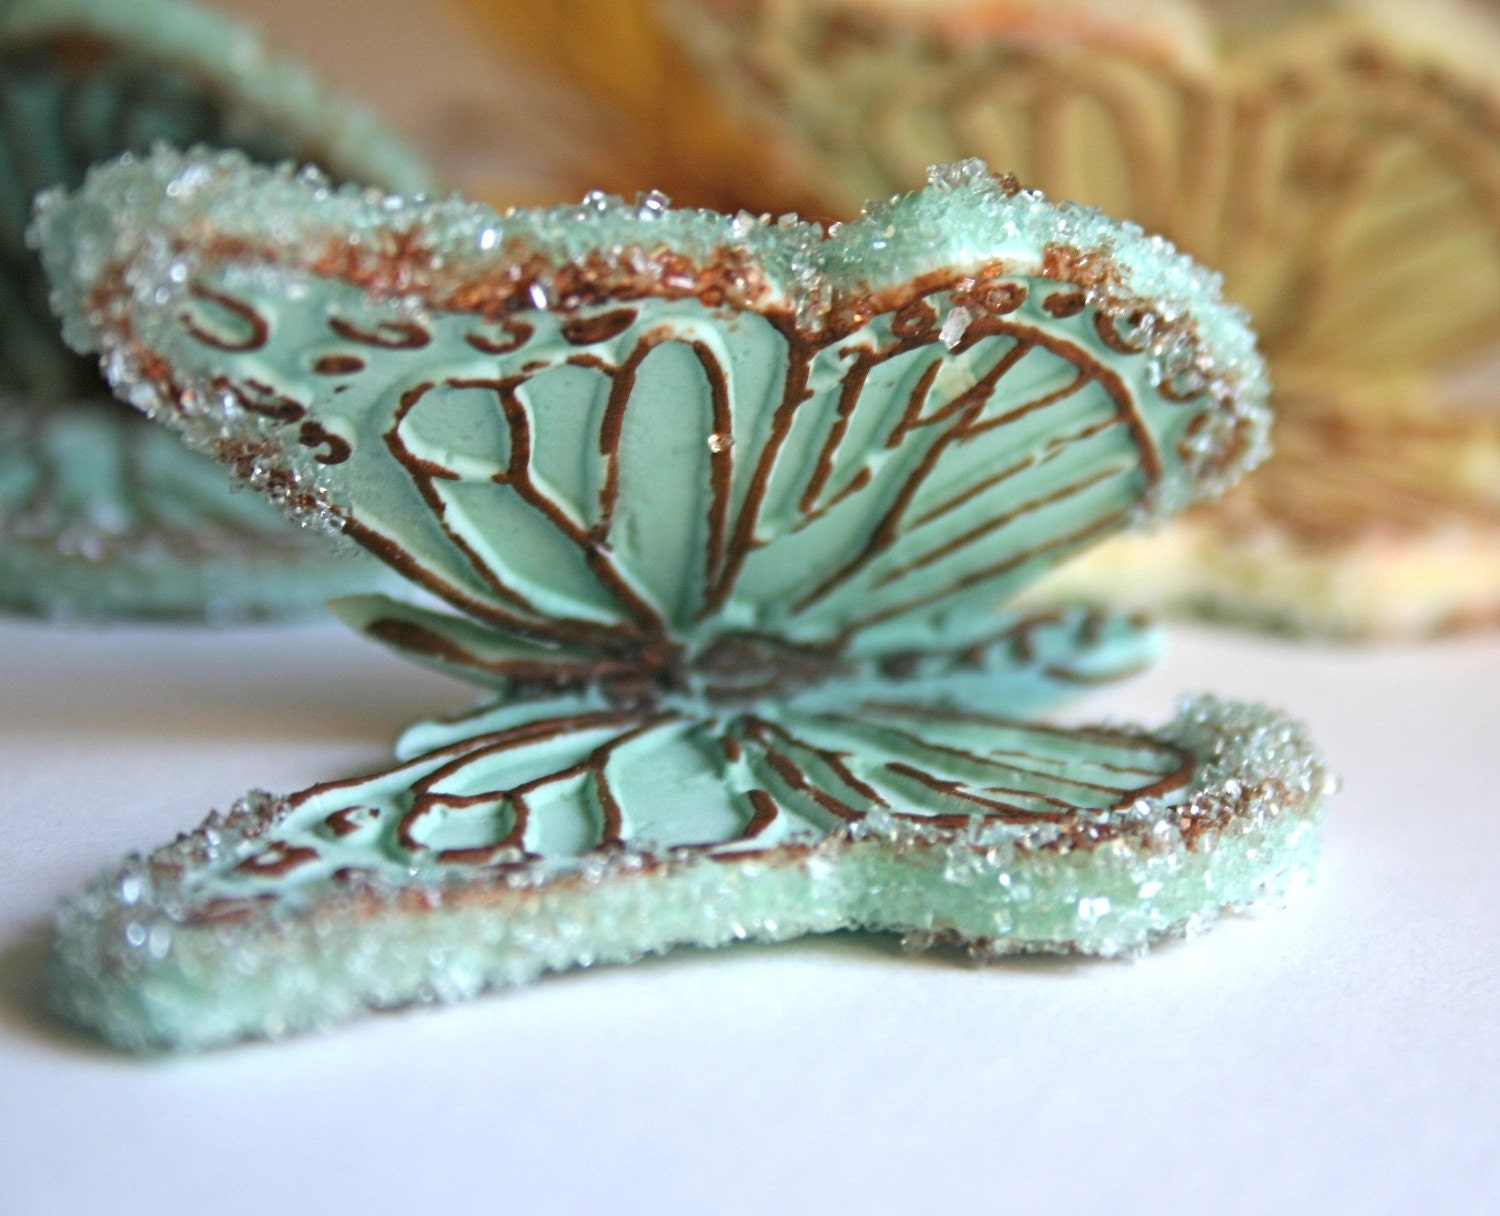 Edible Sugar Butterflies Pale Yellow and Turquoise 10